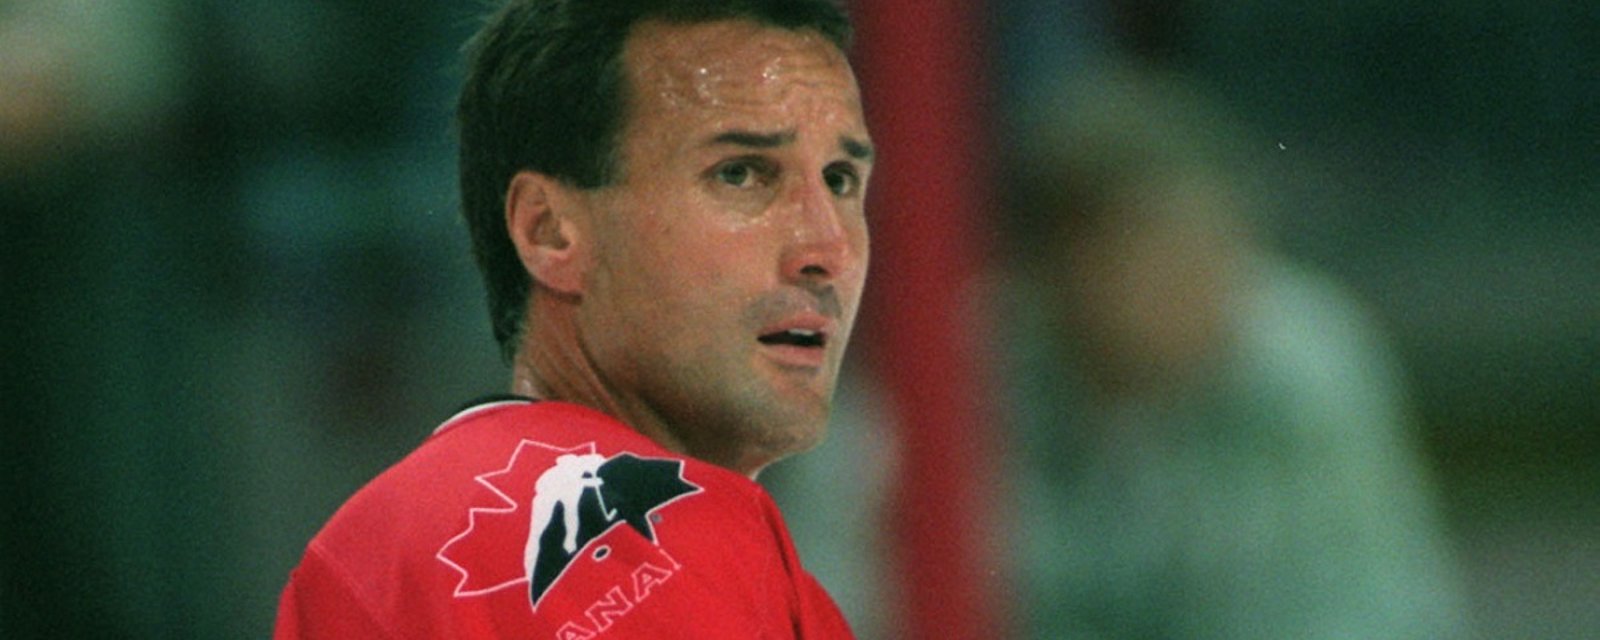 Legend Paul Coffey says the modern NHL is missing something.